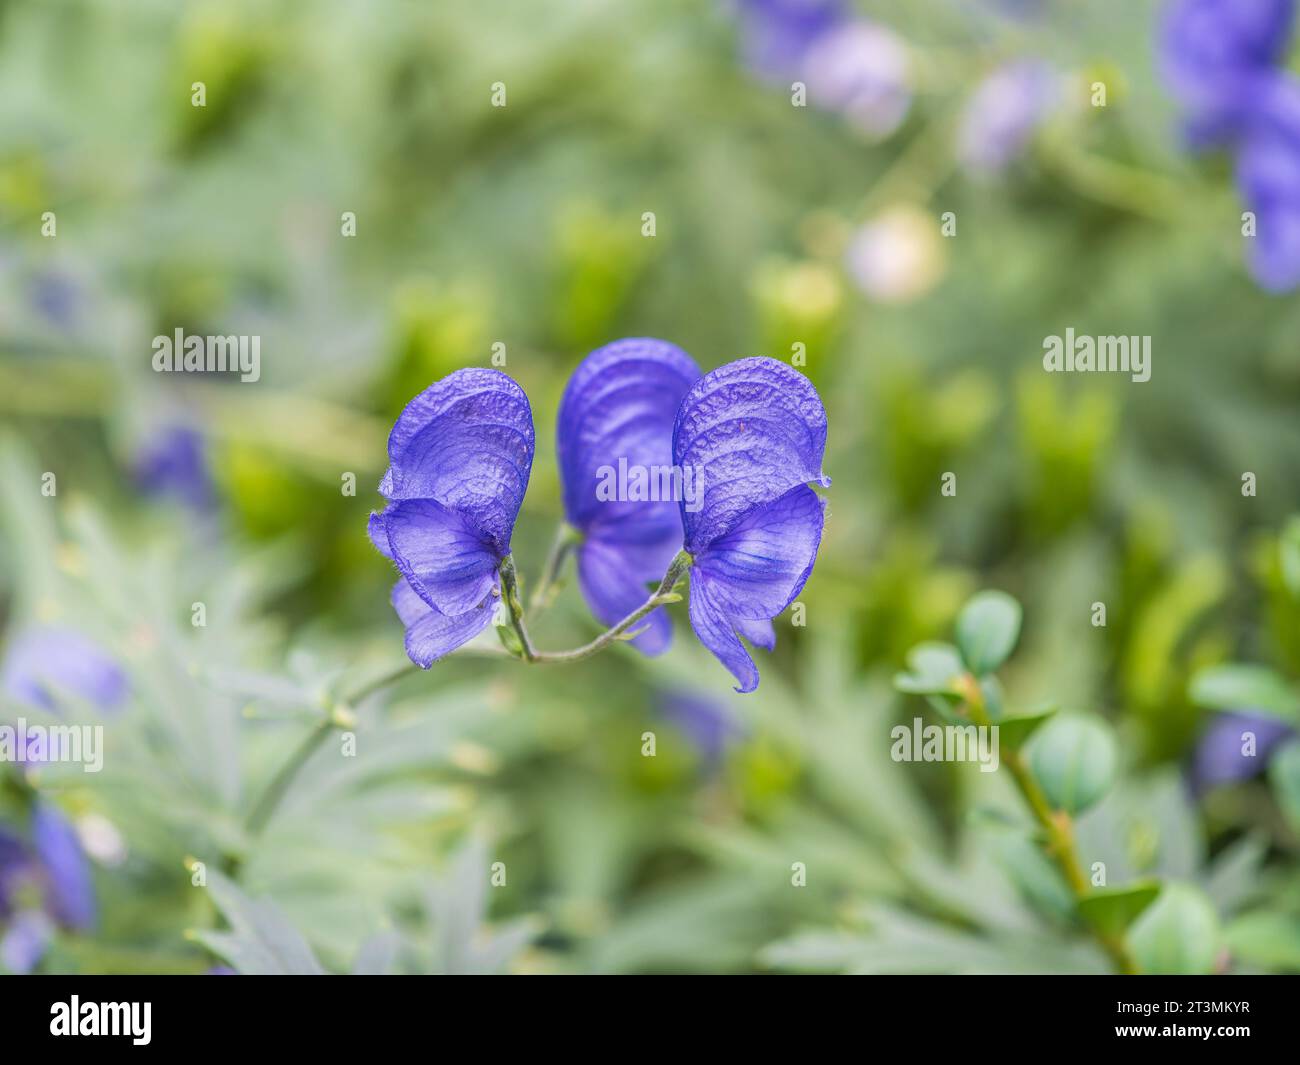 Beautiful autumn flower heard of blue azure of Monk's Hood, a toxic plant used as a poison. Aconitum carmichaelii Arendsii. Aconitum blue flowers on g Stock Photo